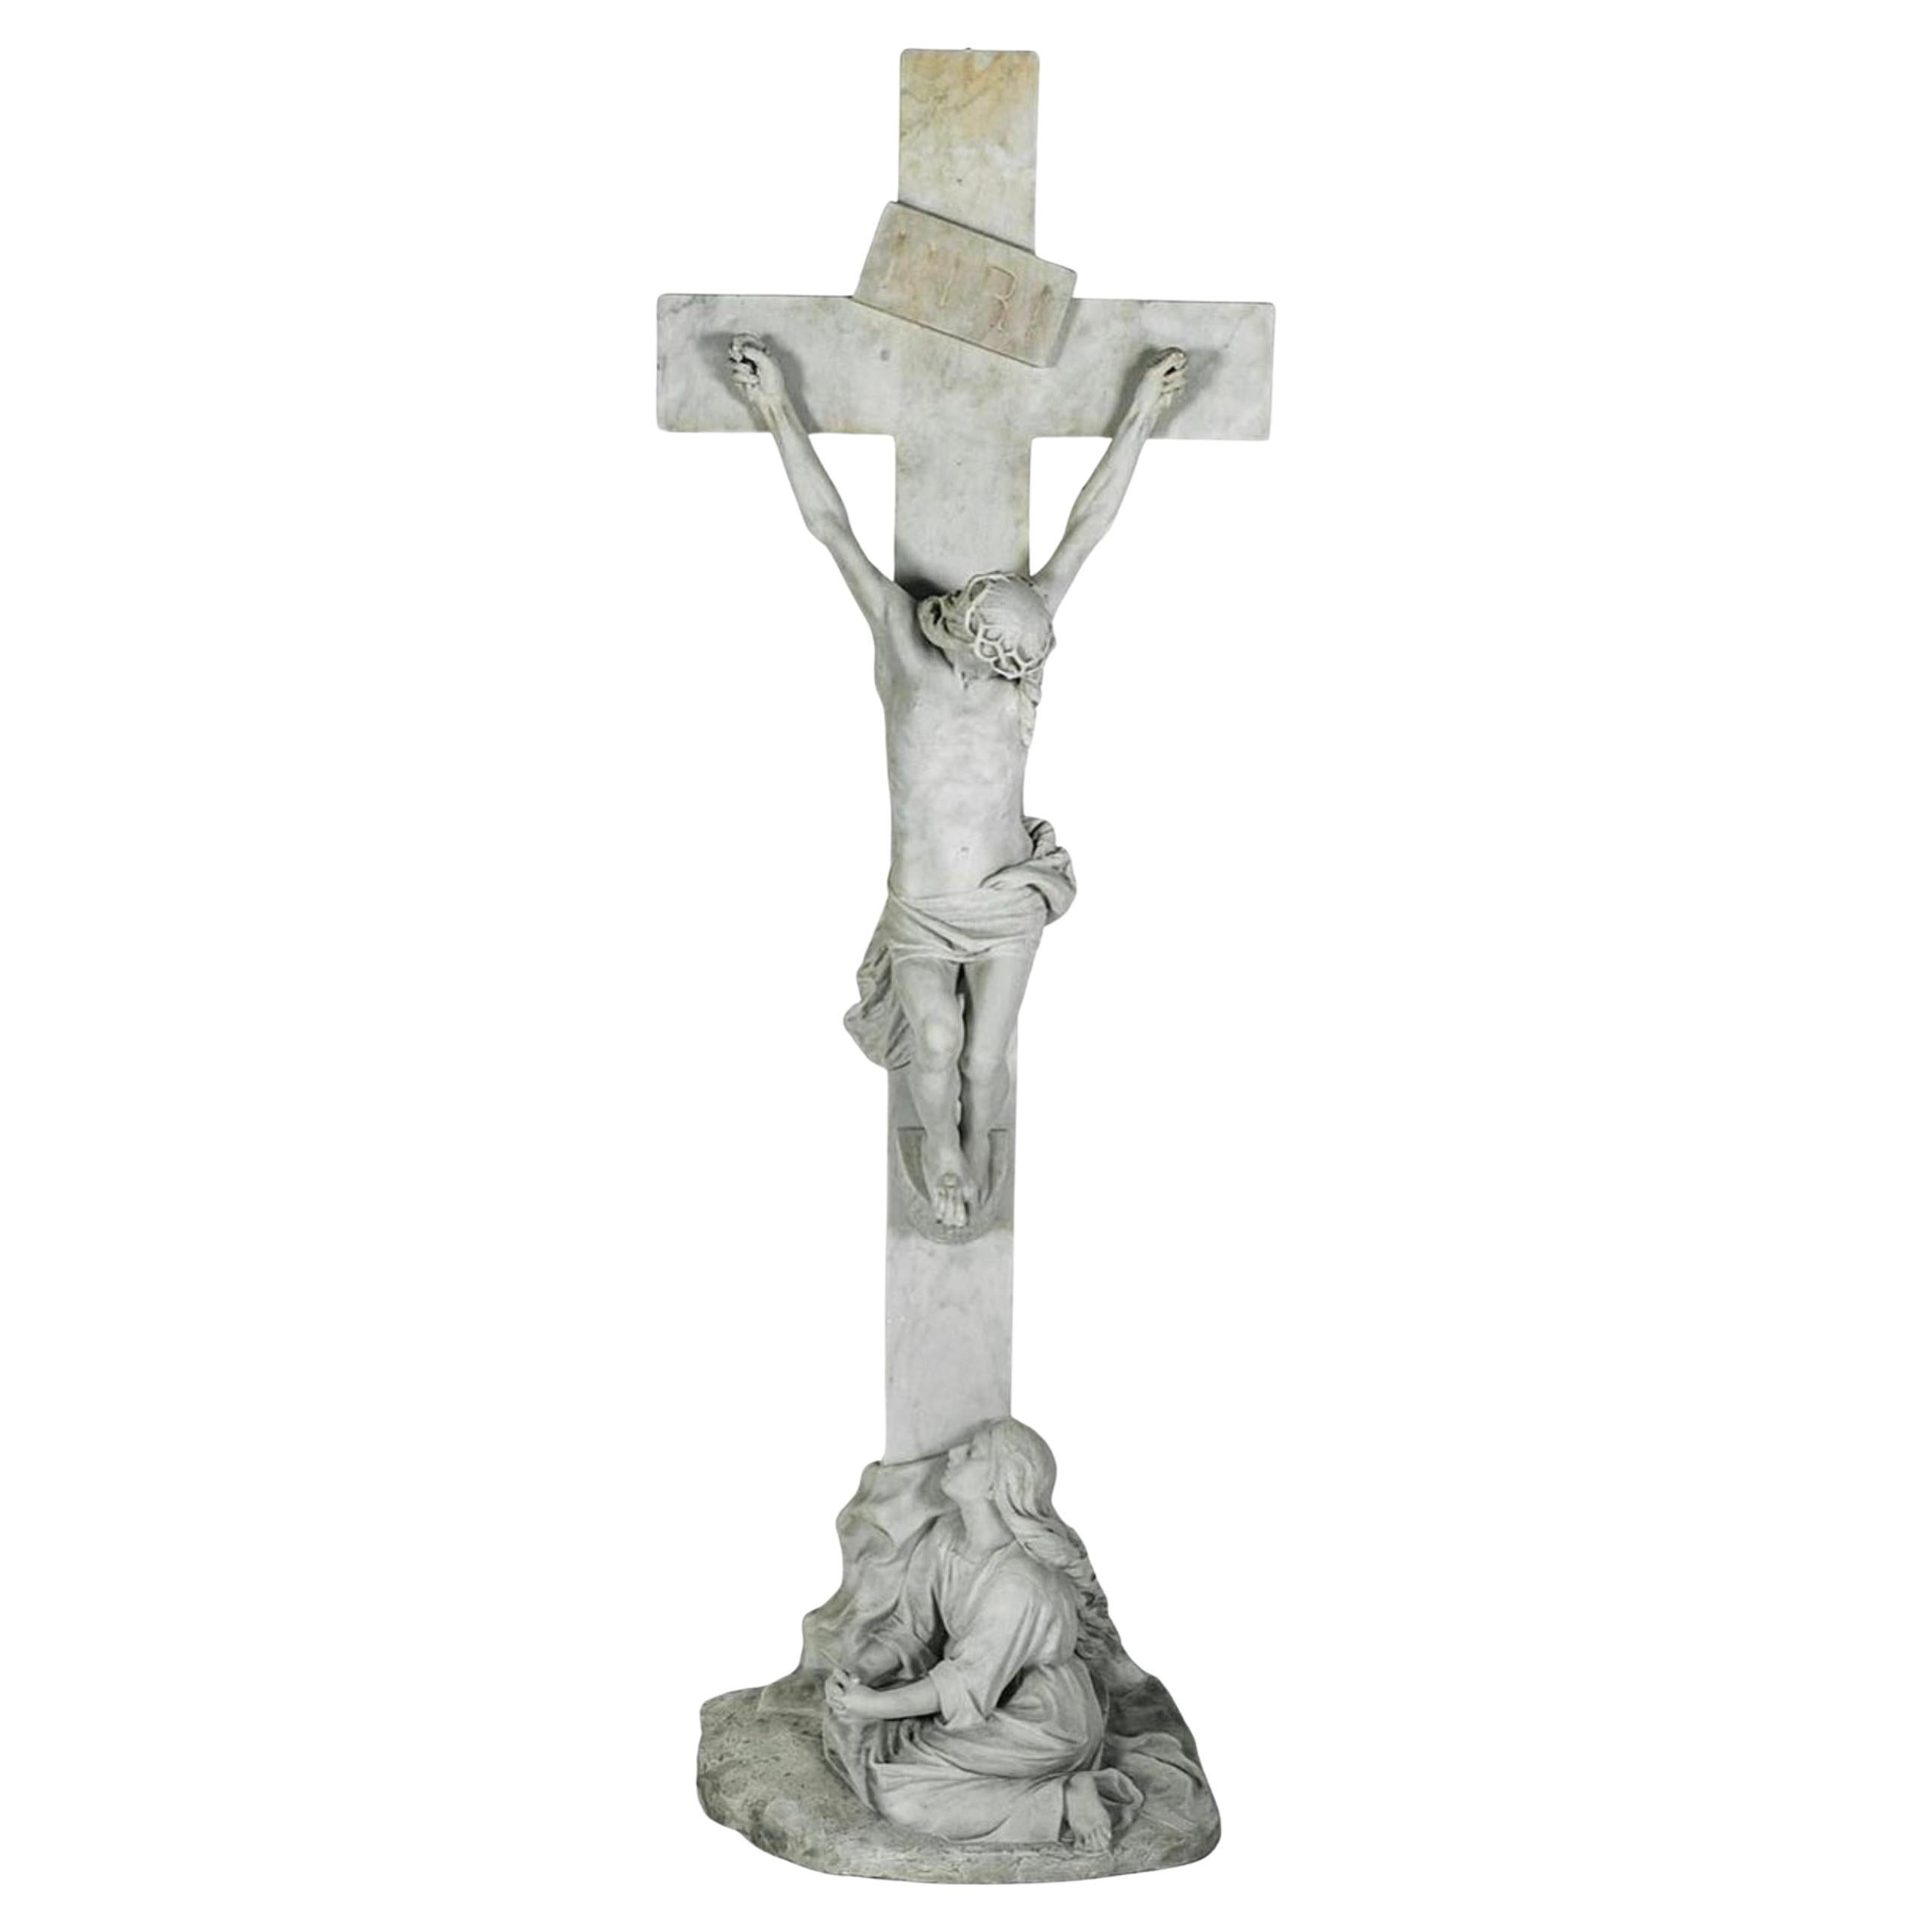 Carrara Crucifix Signed and Dated by Artist, Very Large Size